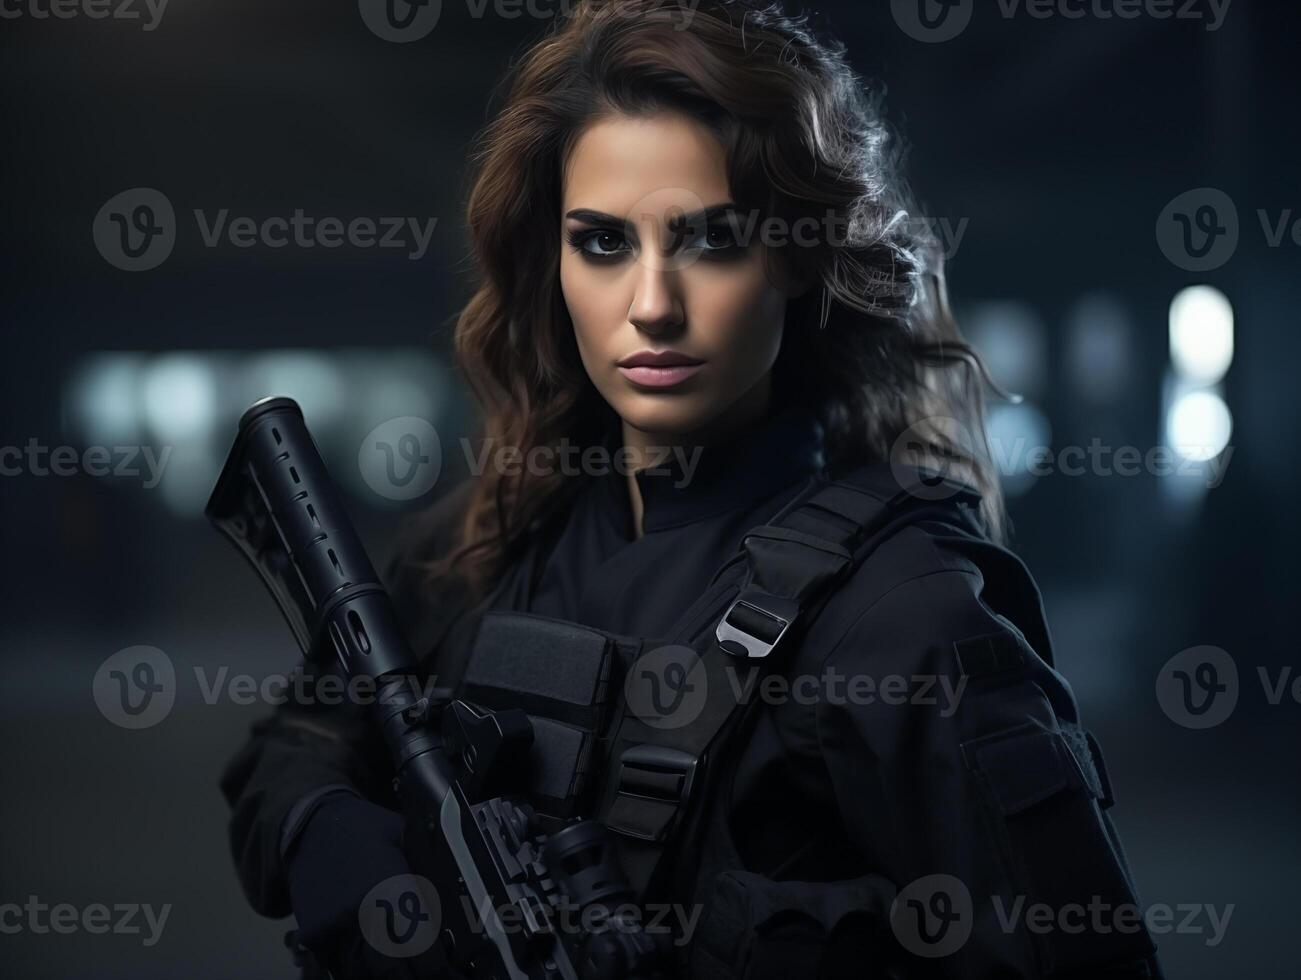 Female police officer at work close-up. Woman career concept photo